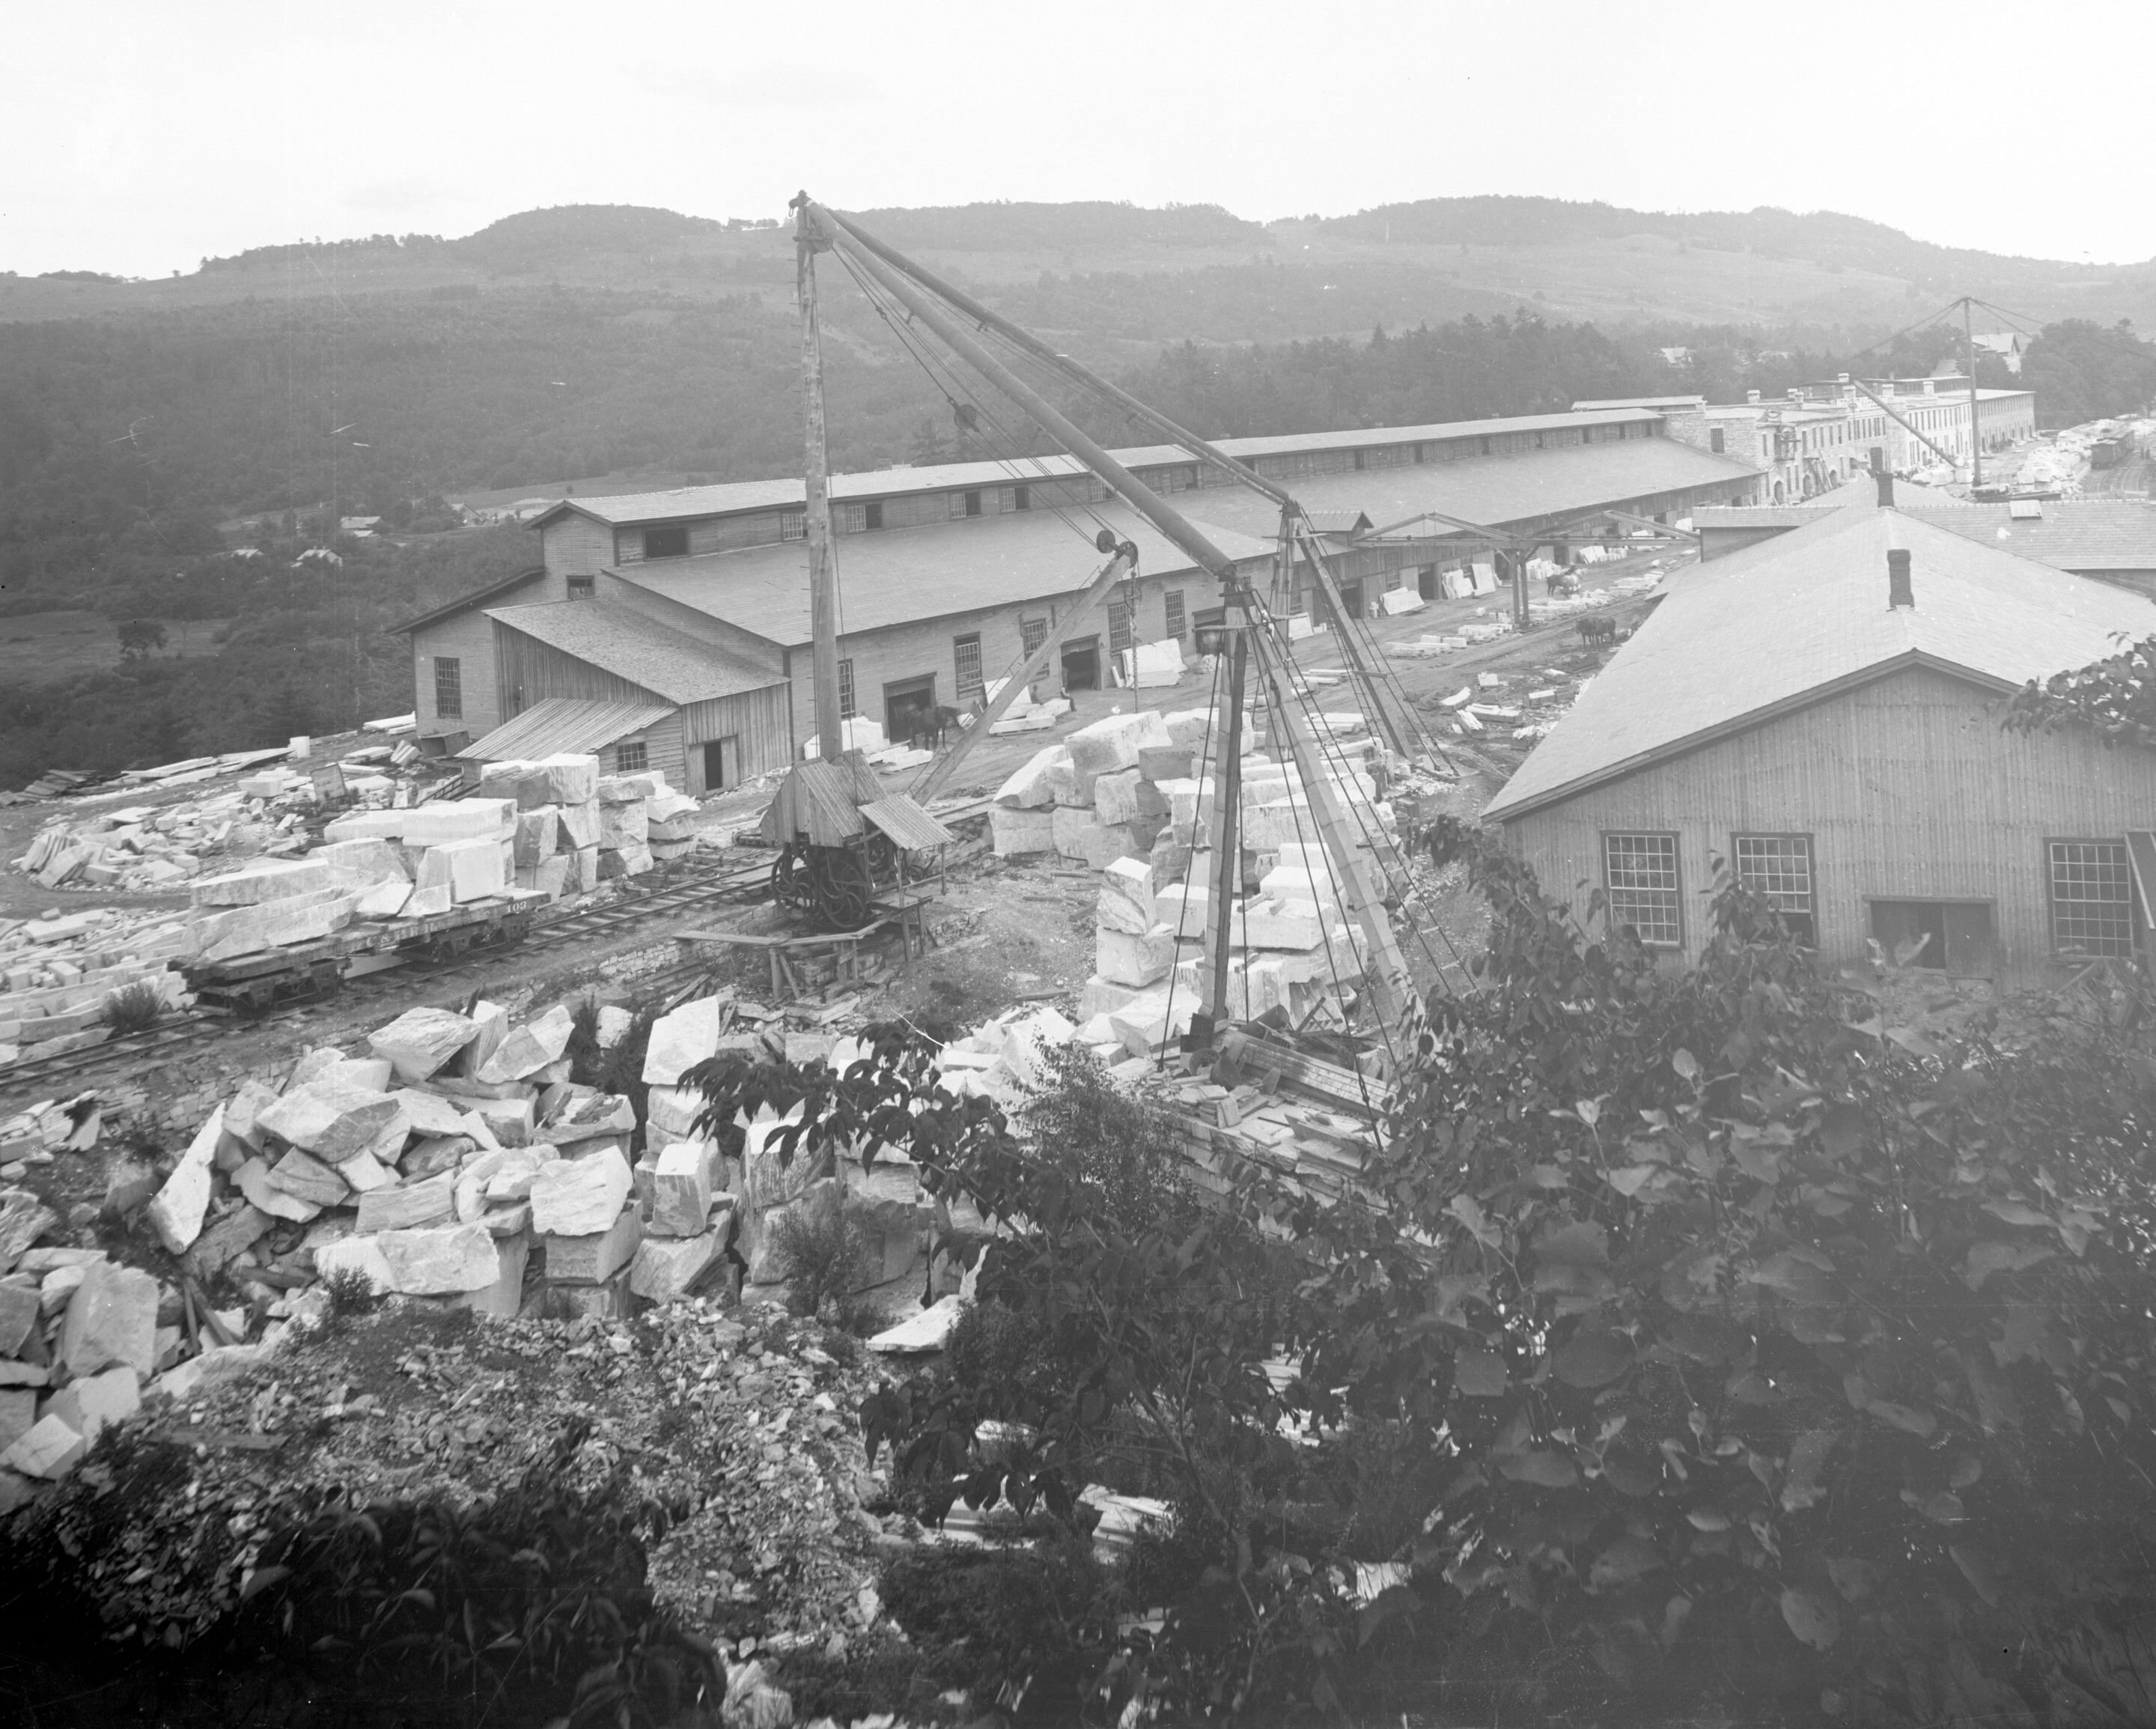 The vermont marble company quarry in black and white